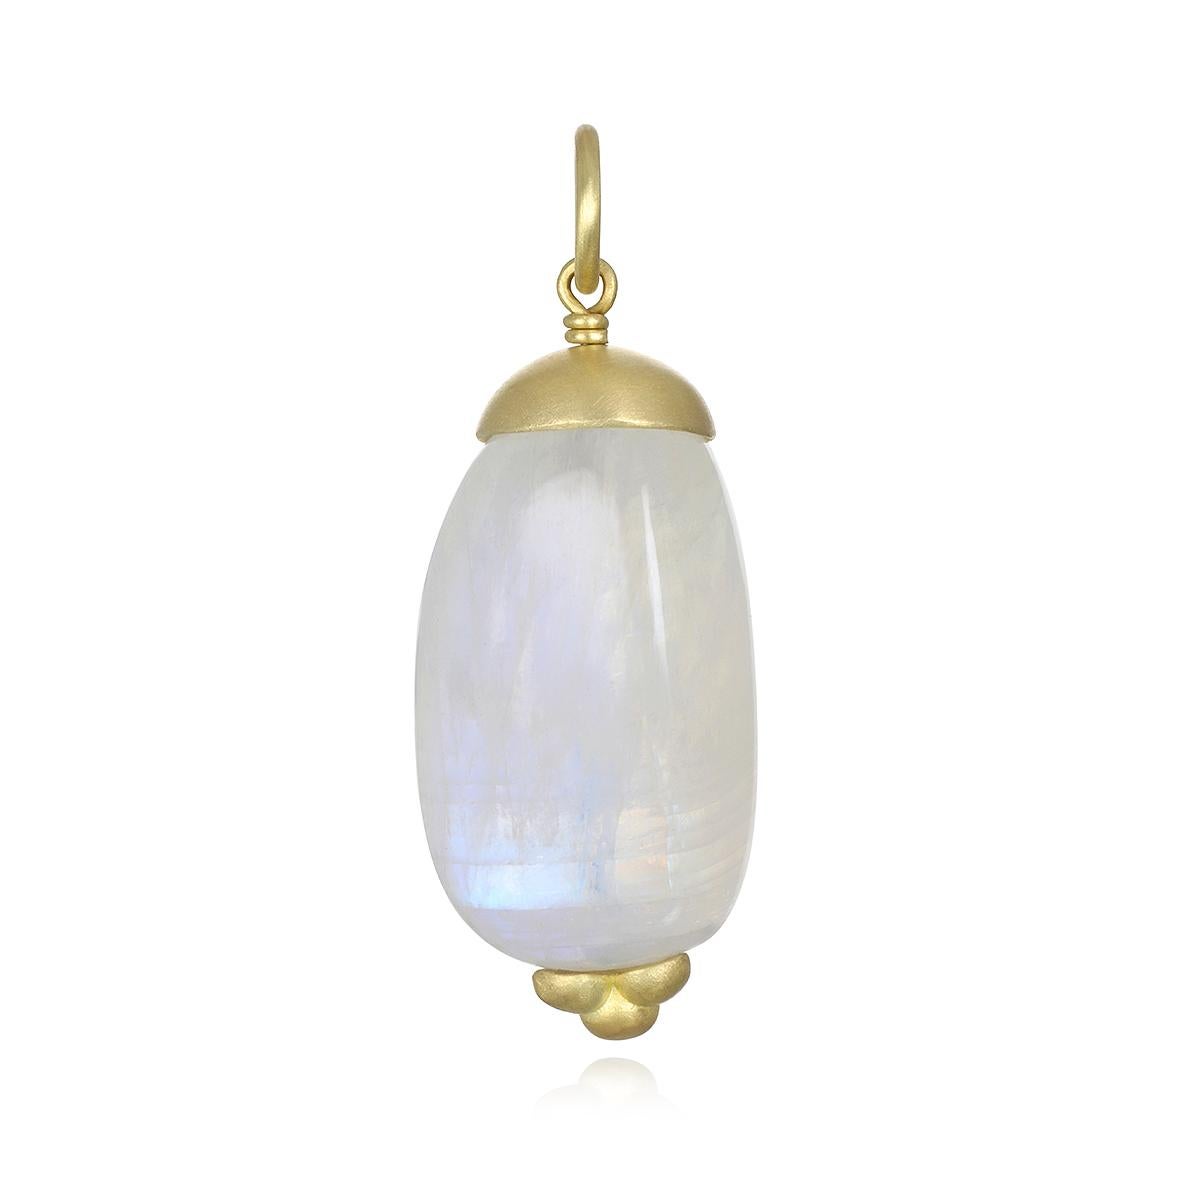 This spectacular Faye Kim 18 Karat Gold* Moonstone Nugget Pendant, with its gold cap and bead, is full of light and reflects beautiful translucent blue hues. The moonstone's distinctive 